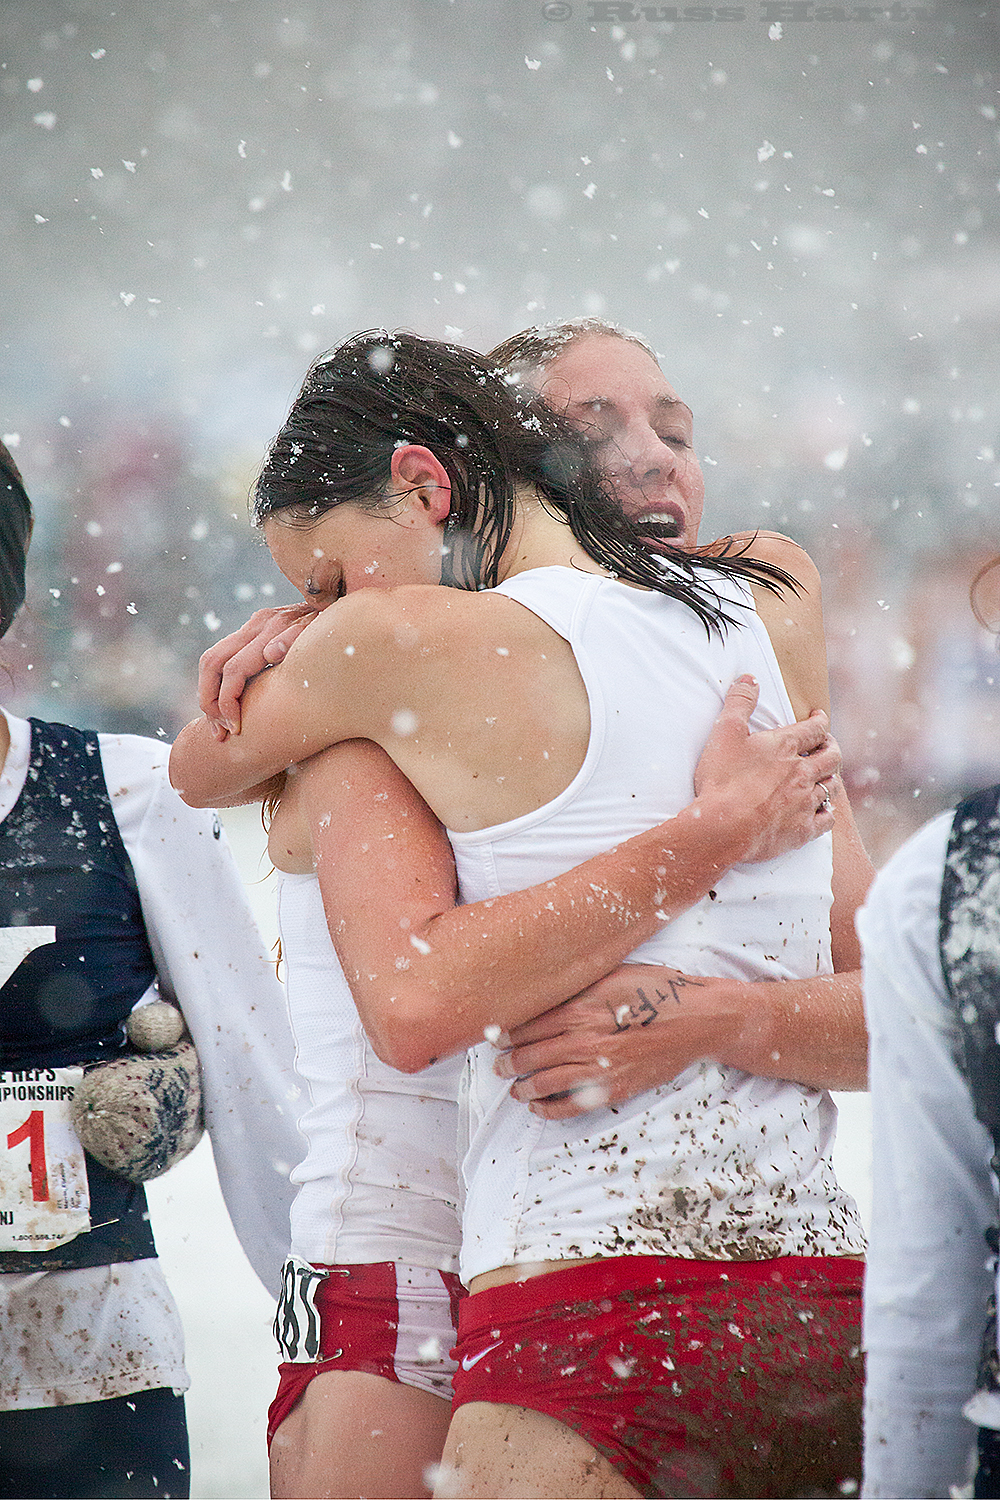 Warriors' embrace after a valiant and winning effort (in a freak October snowstorm) at the 2011 Heptagonal Cross-Country Championsips in Princeton. 